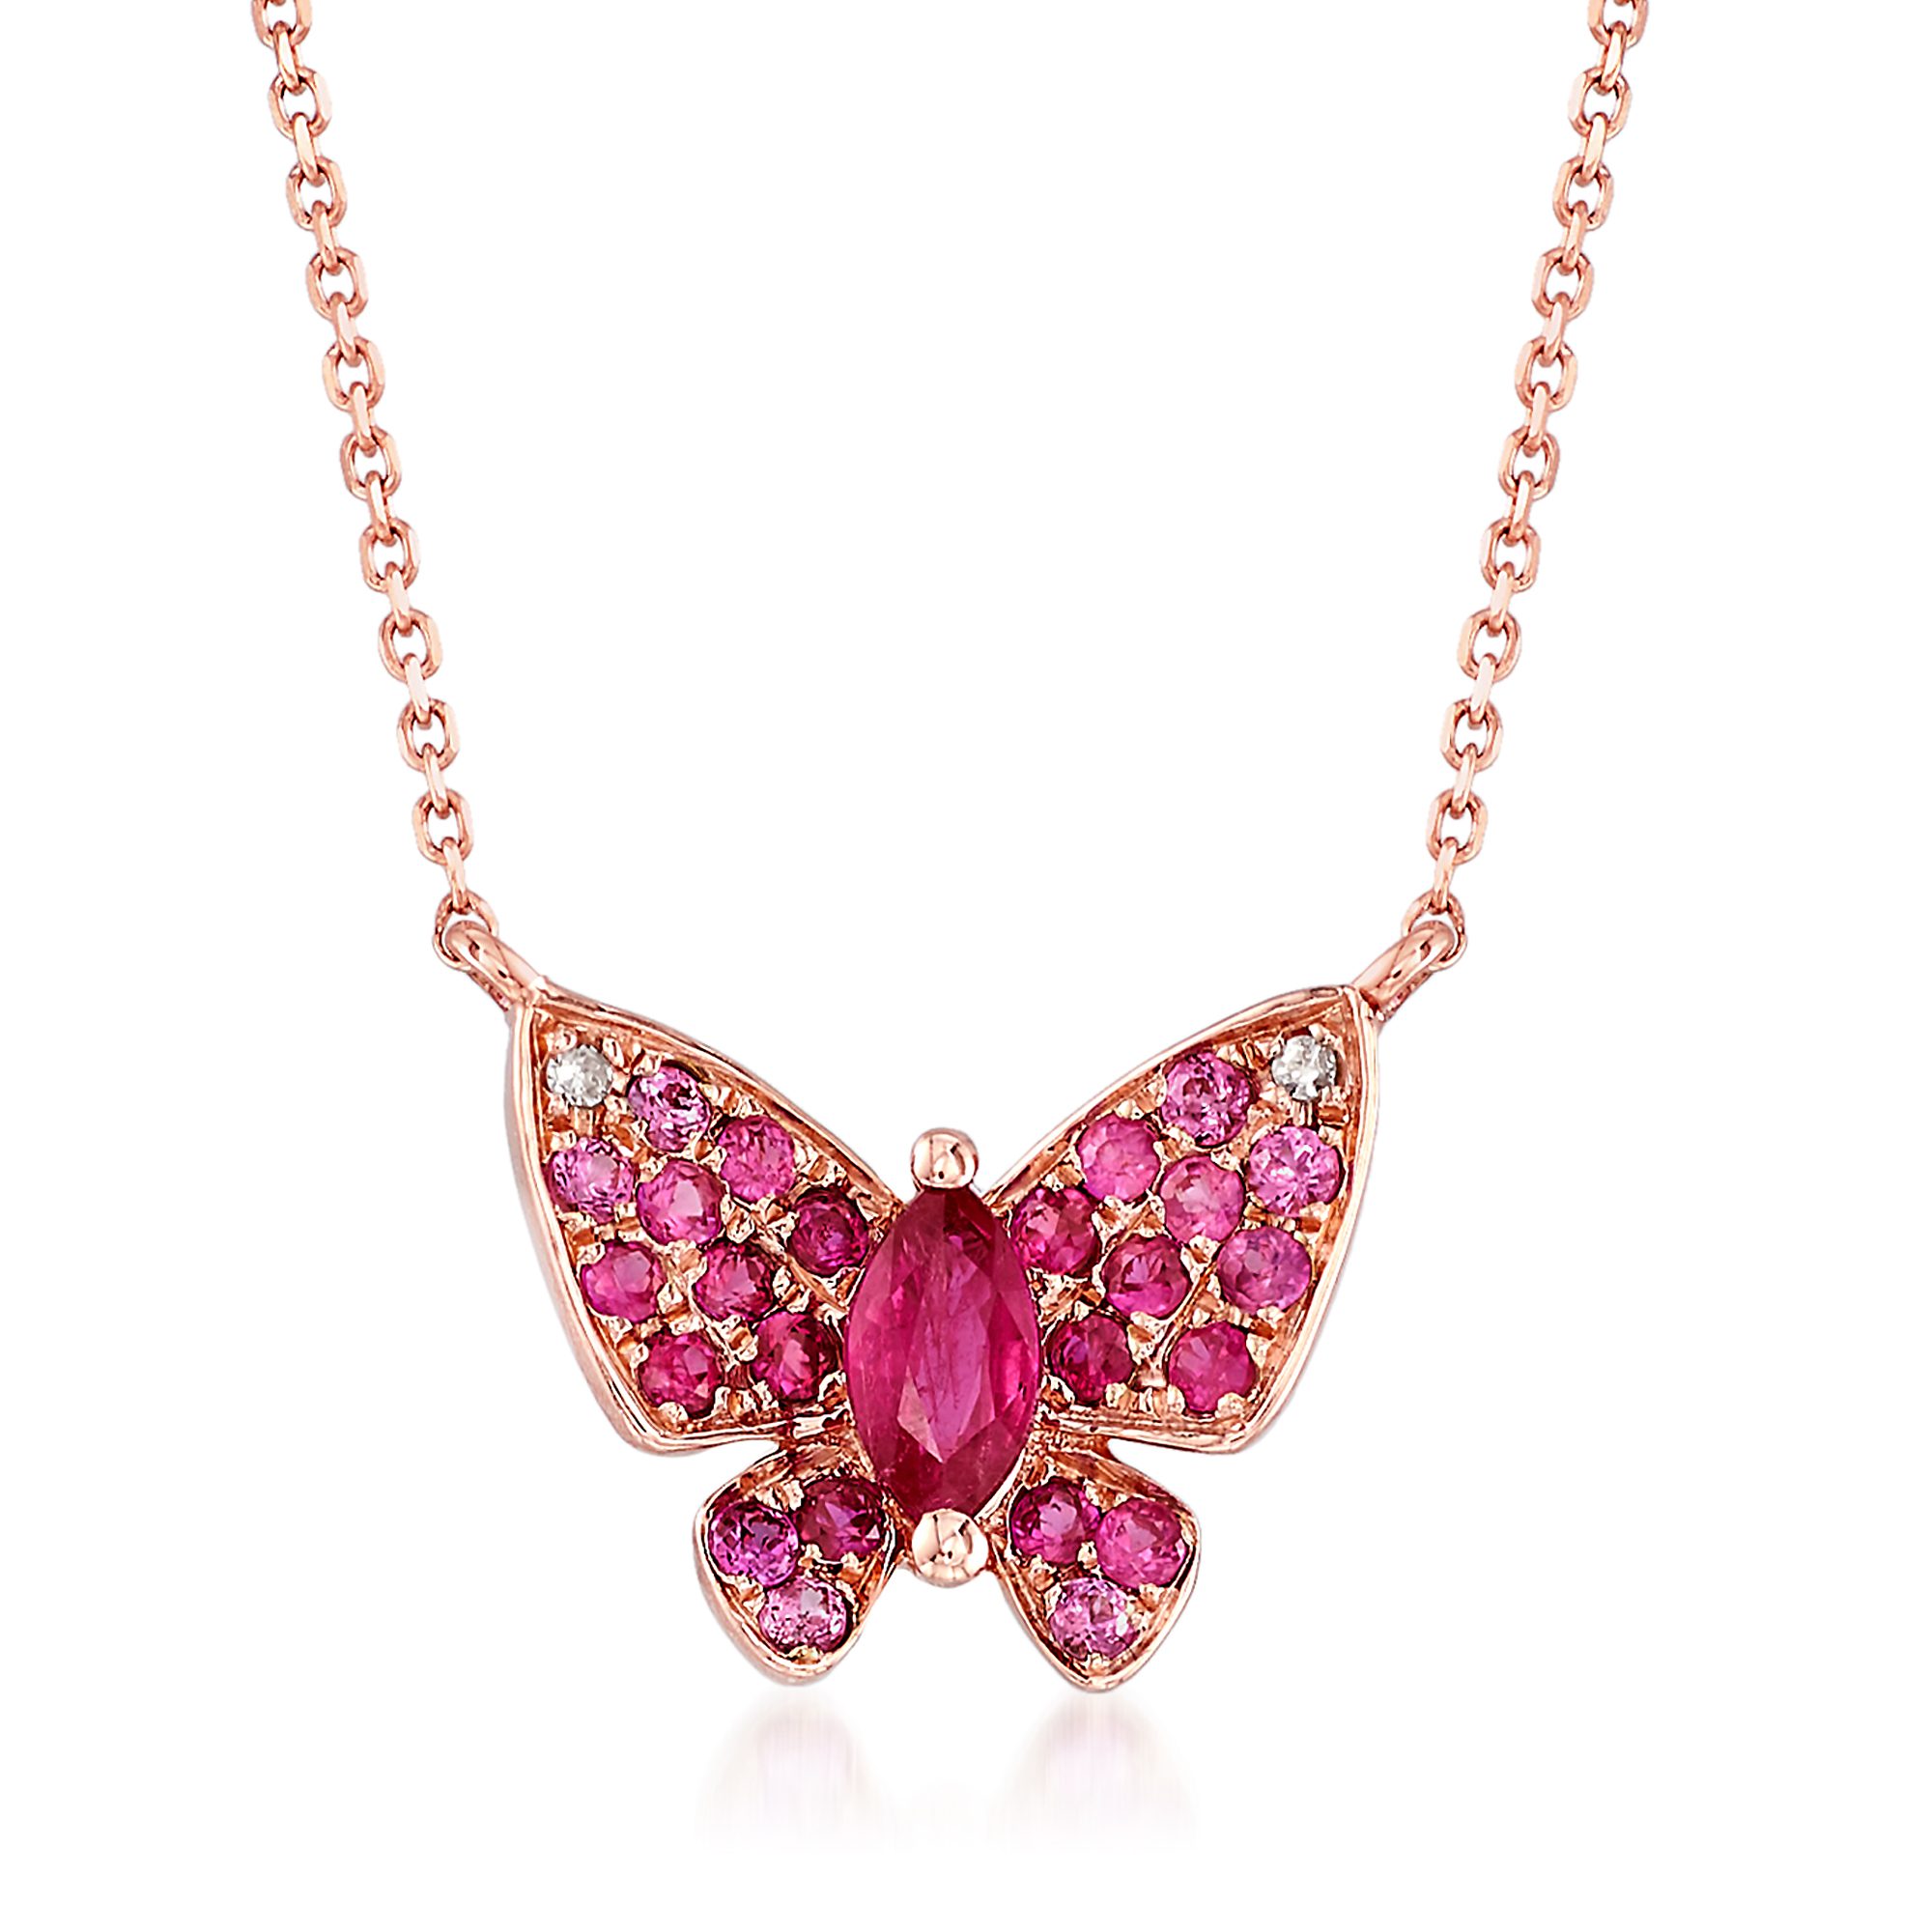 10 Carat Ruby and .20 ct. t.w. Pink Sapphire Butterfly Necklace in 